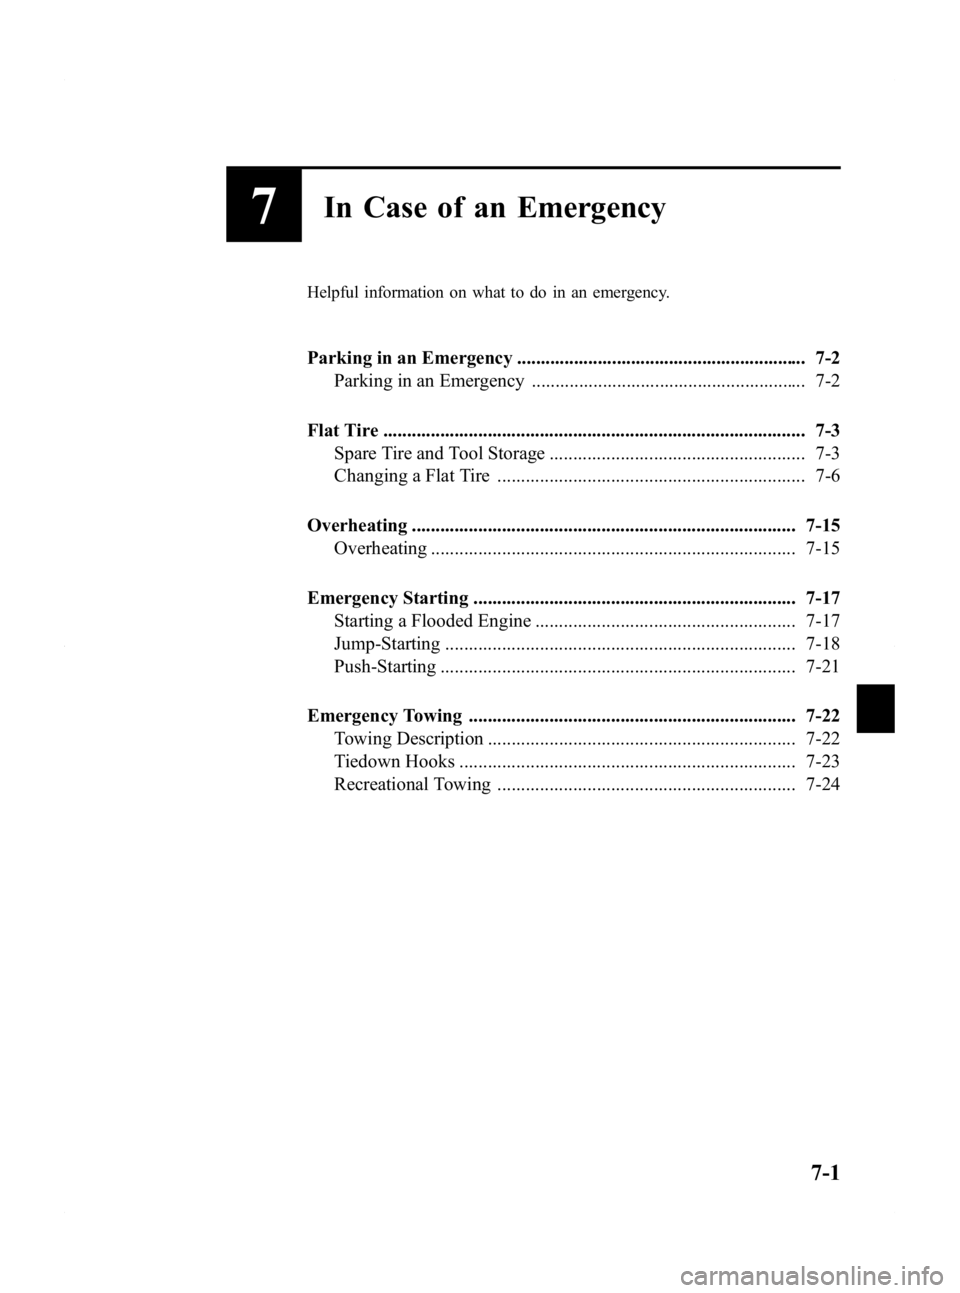 MAZDA MODEL 2 2011  Owners Manual Black plate (209,1)
7In Case of an Emergency
Helpful information on what to do in an emergency.
Parking in an Emergency ............................................................. 7-2Parking in an E